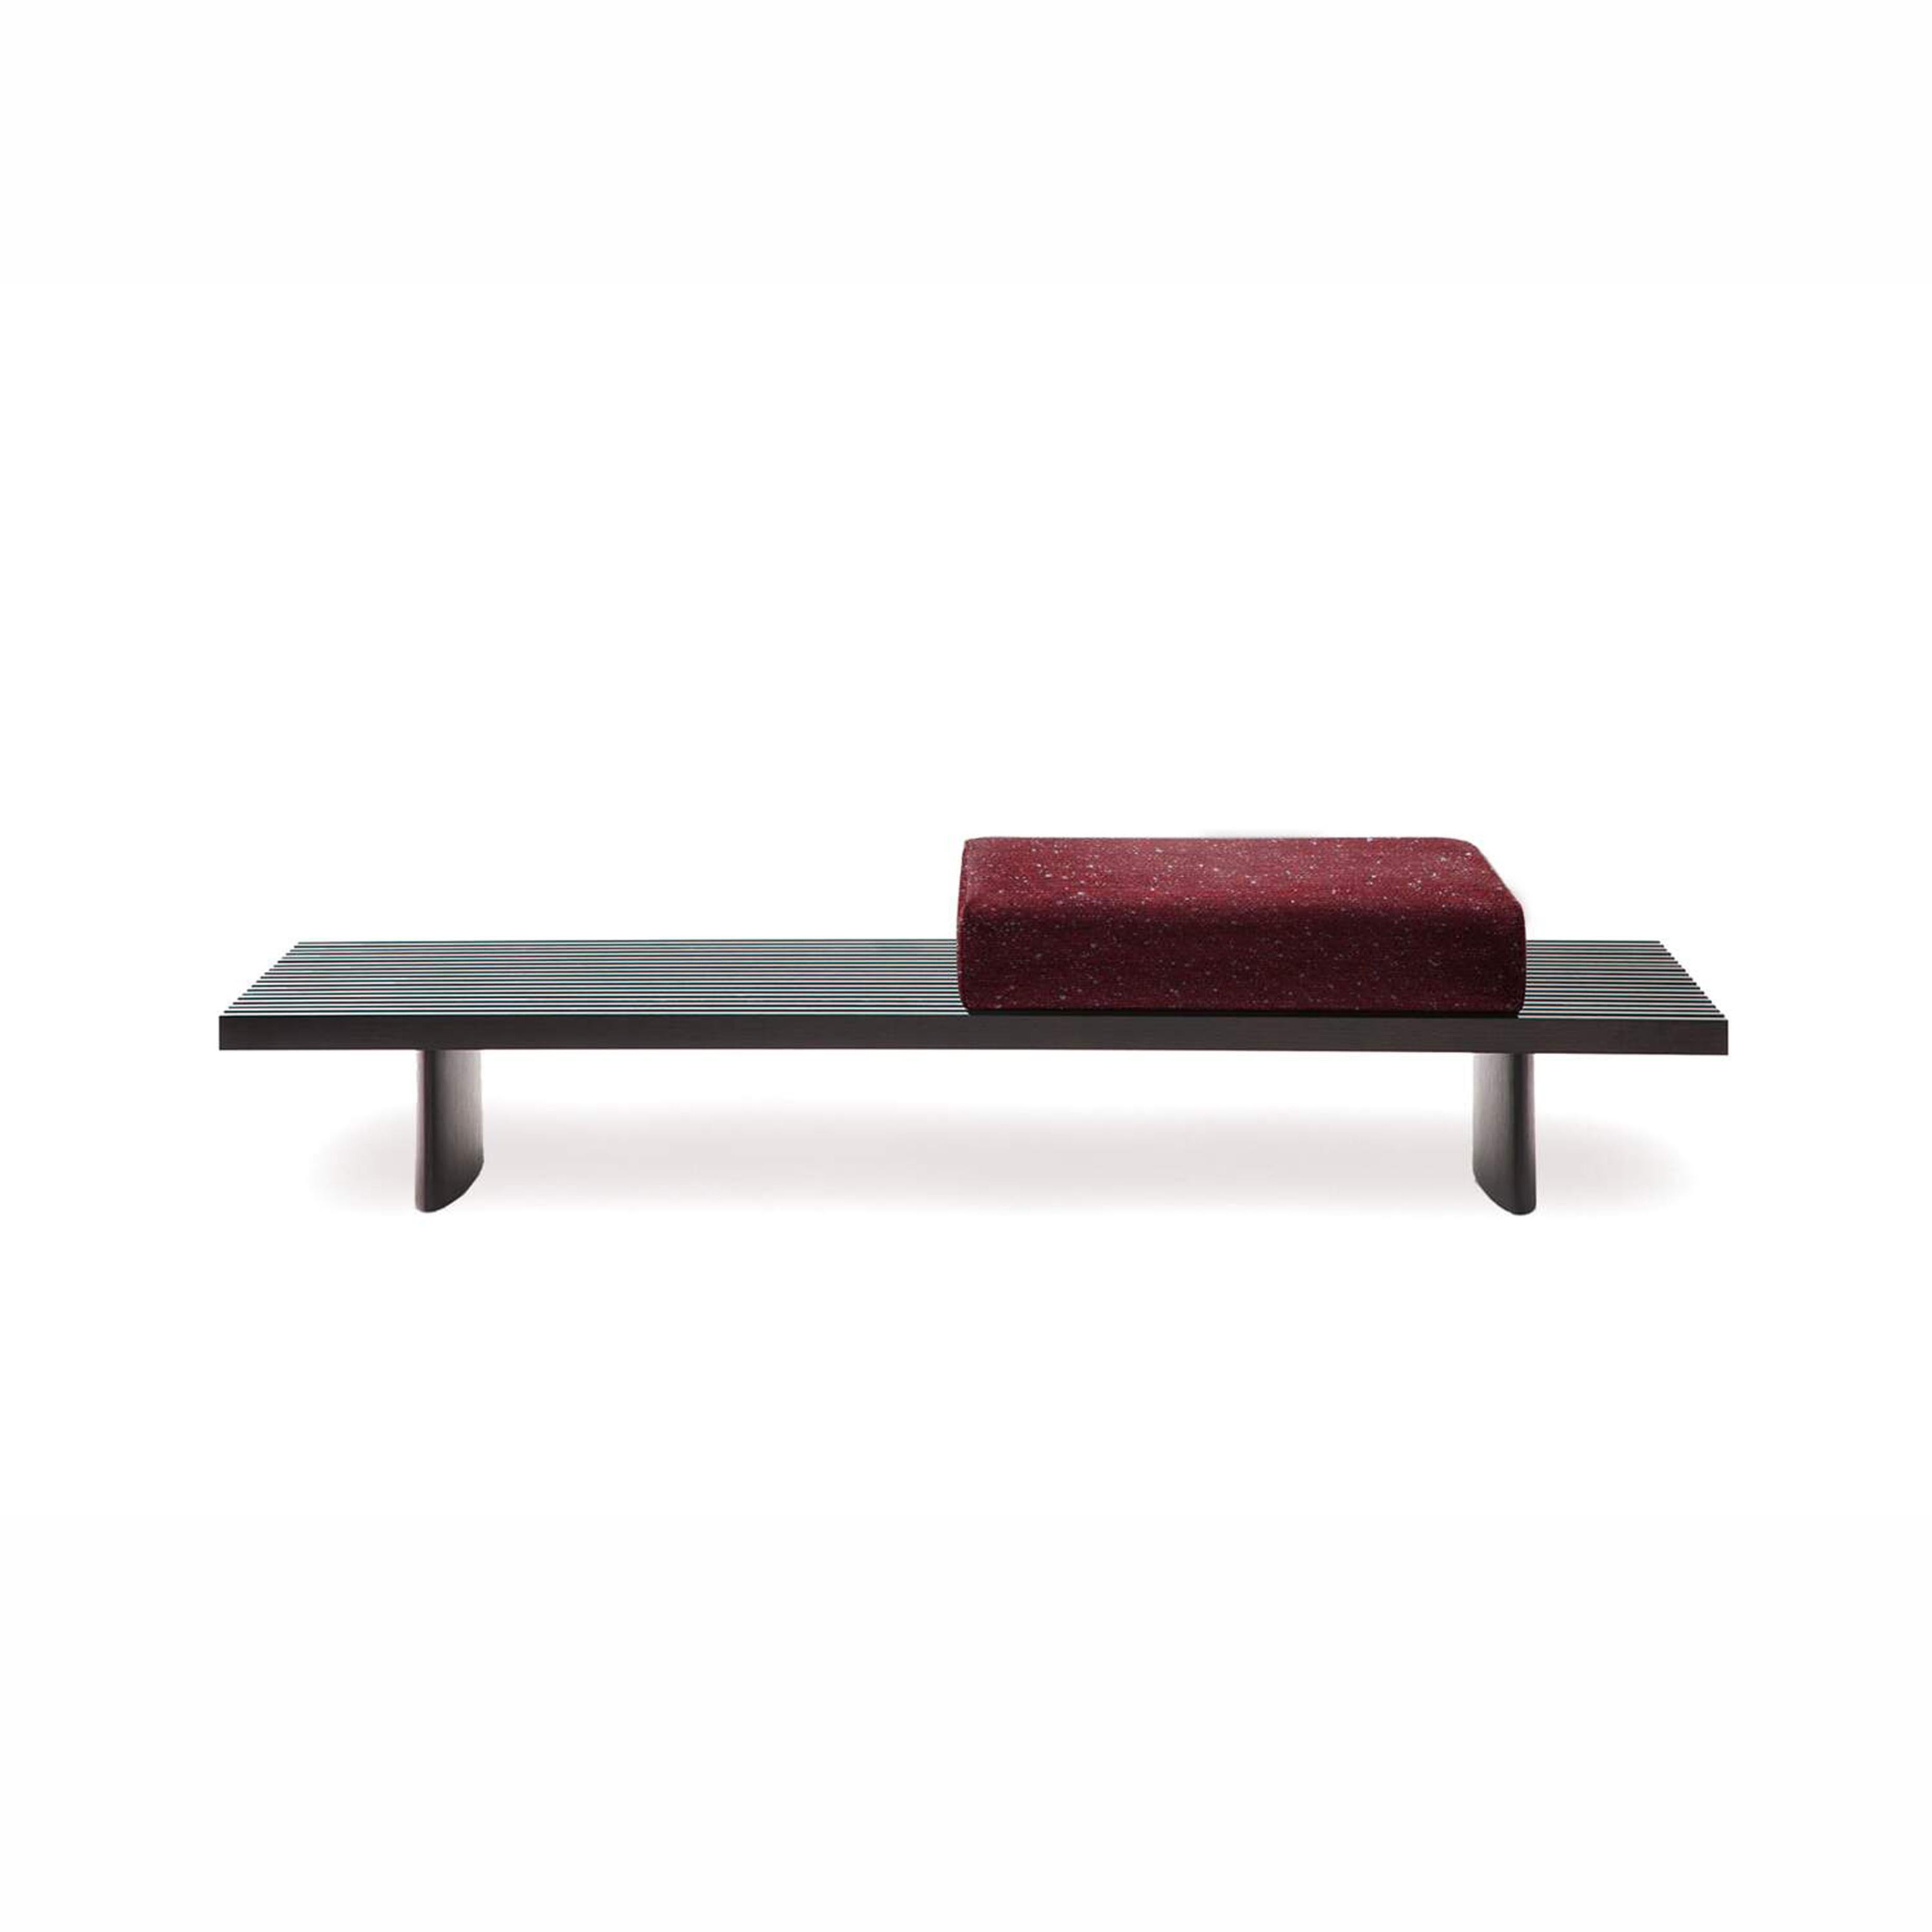 Modular system that can be use as a sofa, bench or other options designed by Charlotte Perriand in 1953. Relaunched by Cassina in 2004. 
Manufactured by Cassina in Italy.

A modular system featuring simple, essential volumes, Refolo was created by